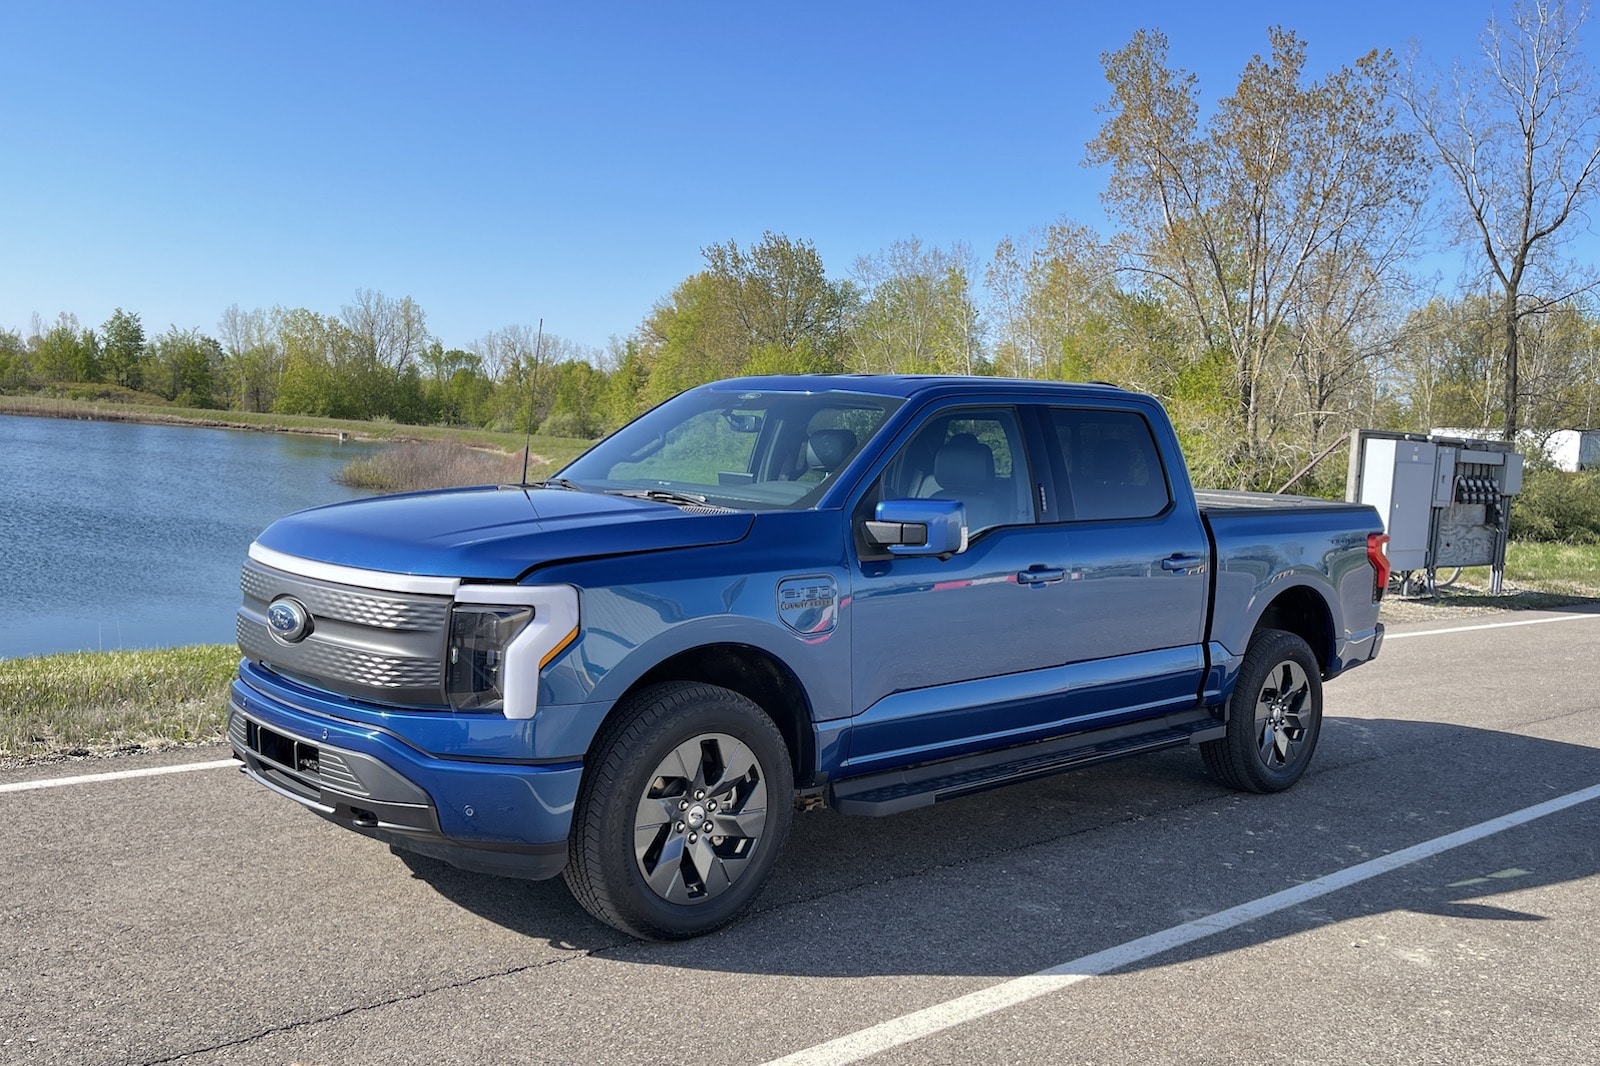 2022 Ford F 150 Lightning Pro 40000 Commercial Truck Revealed Images